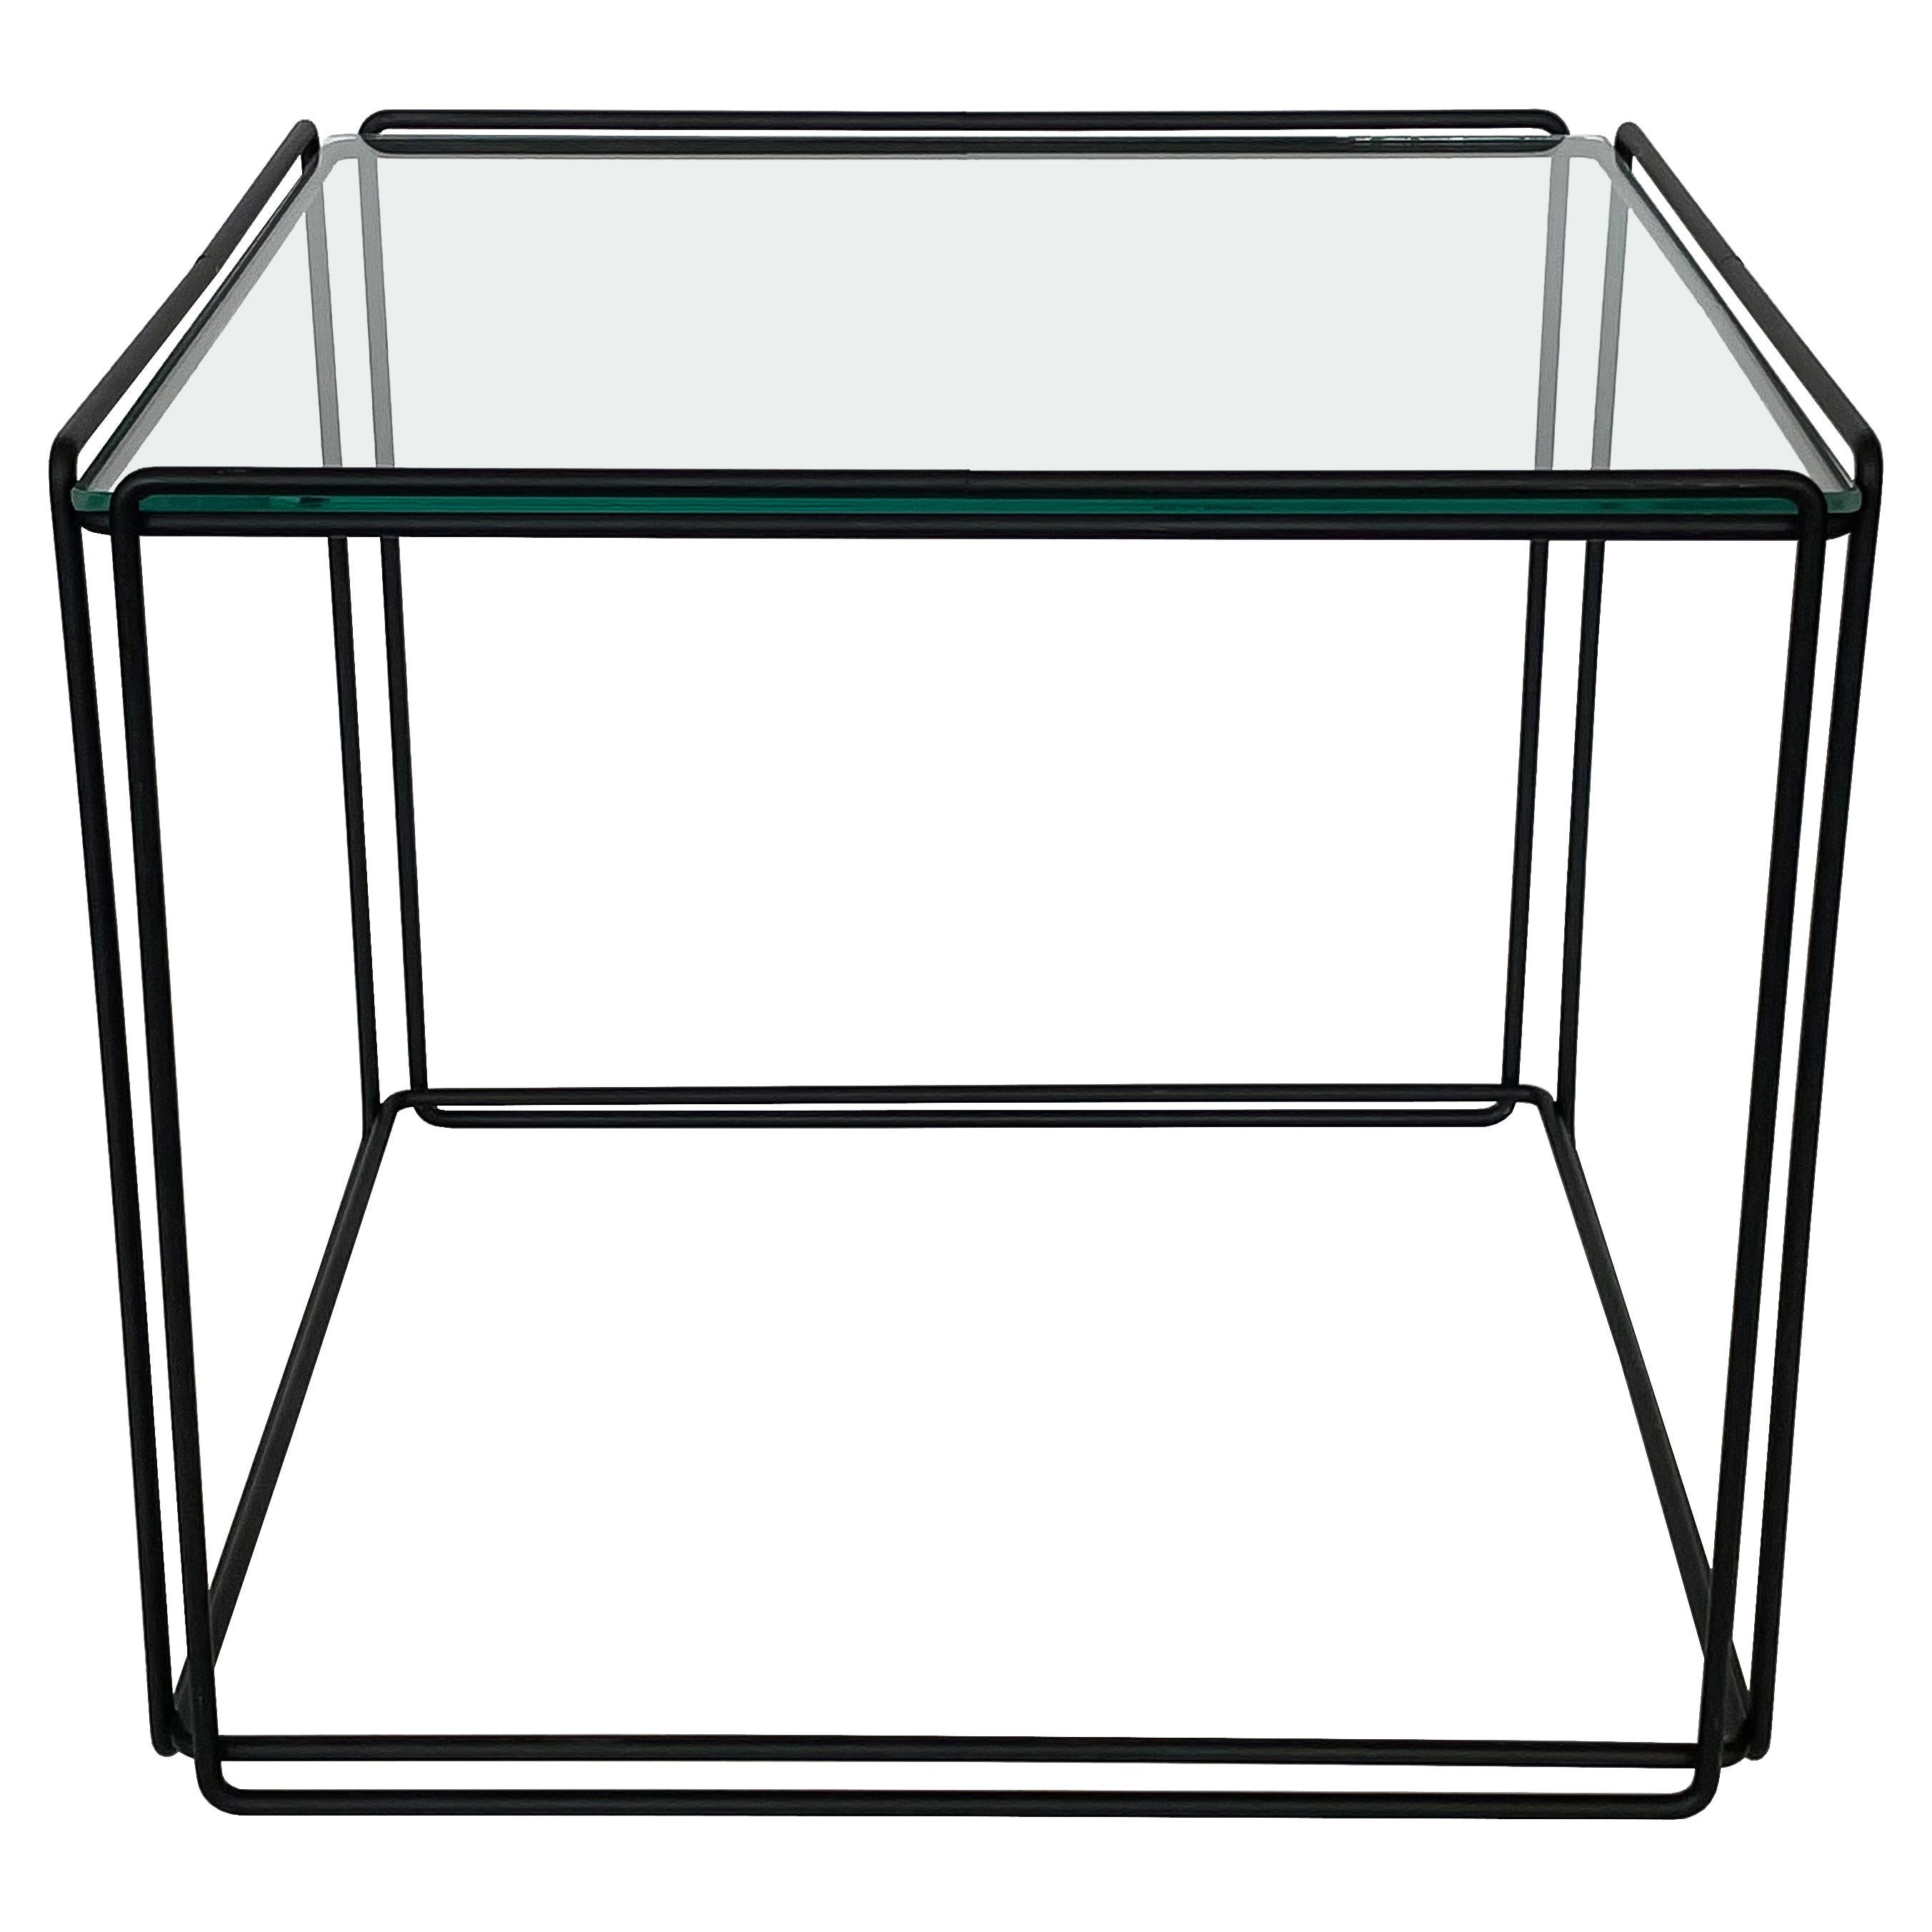 Max Sauze Isoceles Metal and Glass Cube Side Table